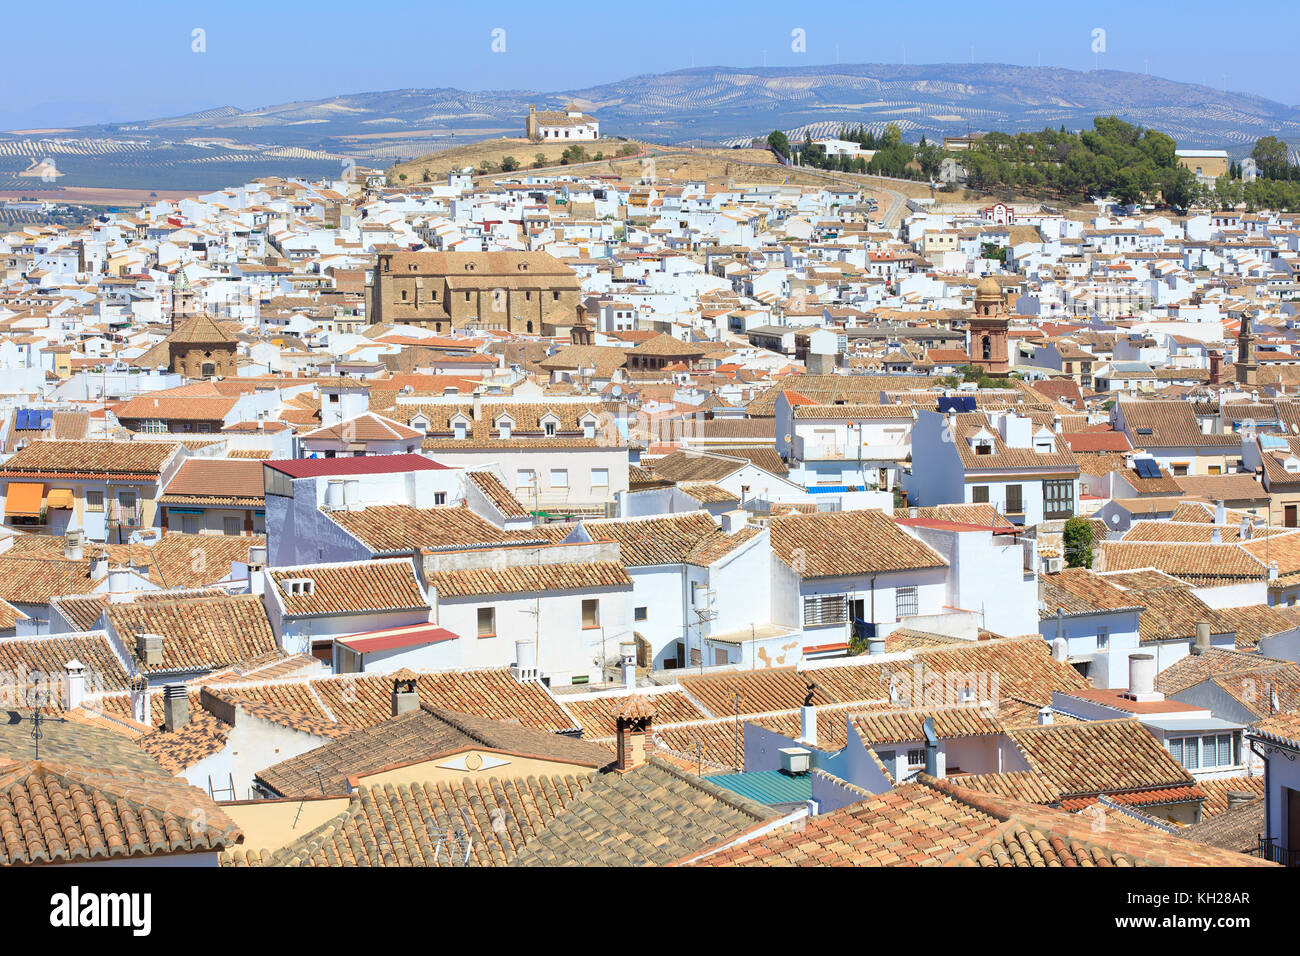 Panoramic view of Antequera (Province of Malaga), Spain Stock Photo